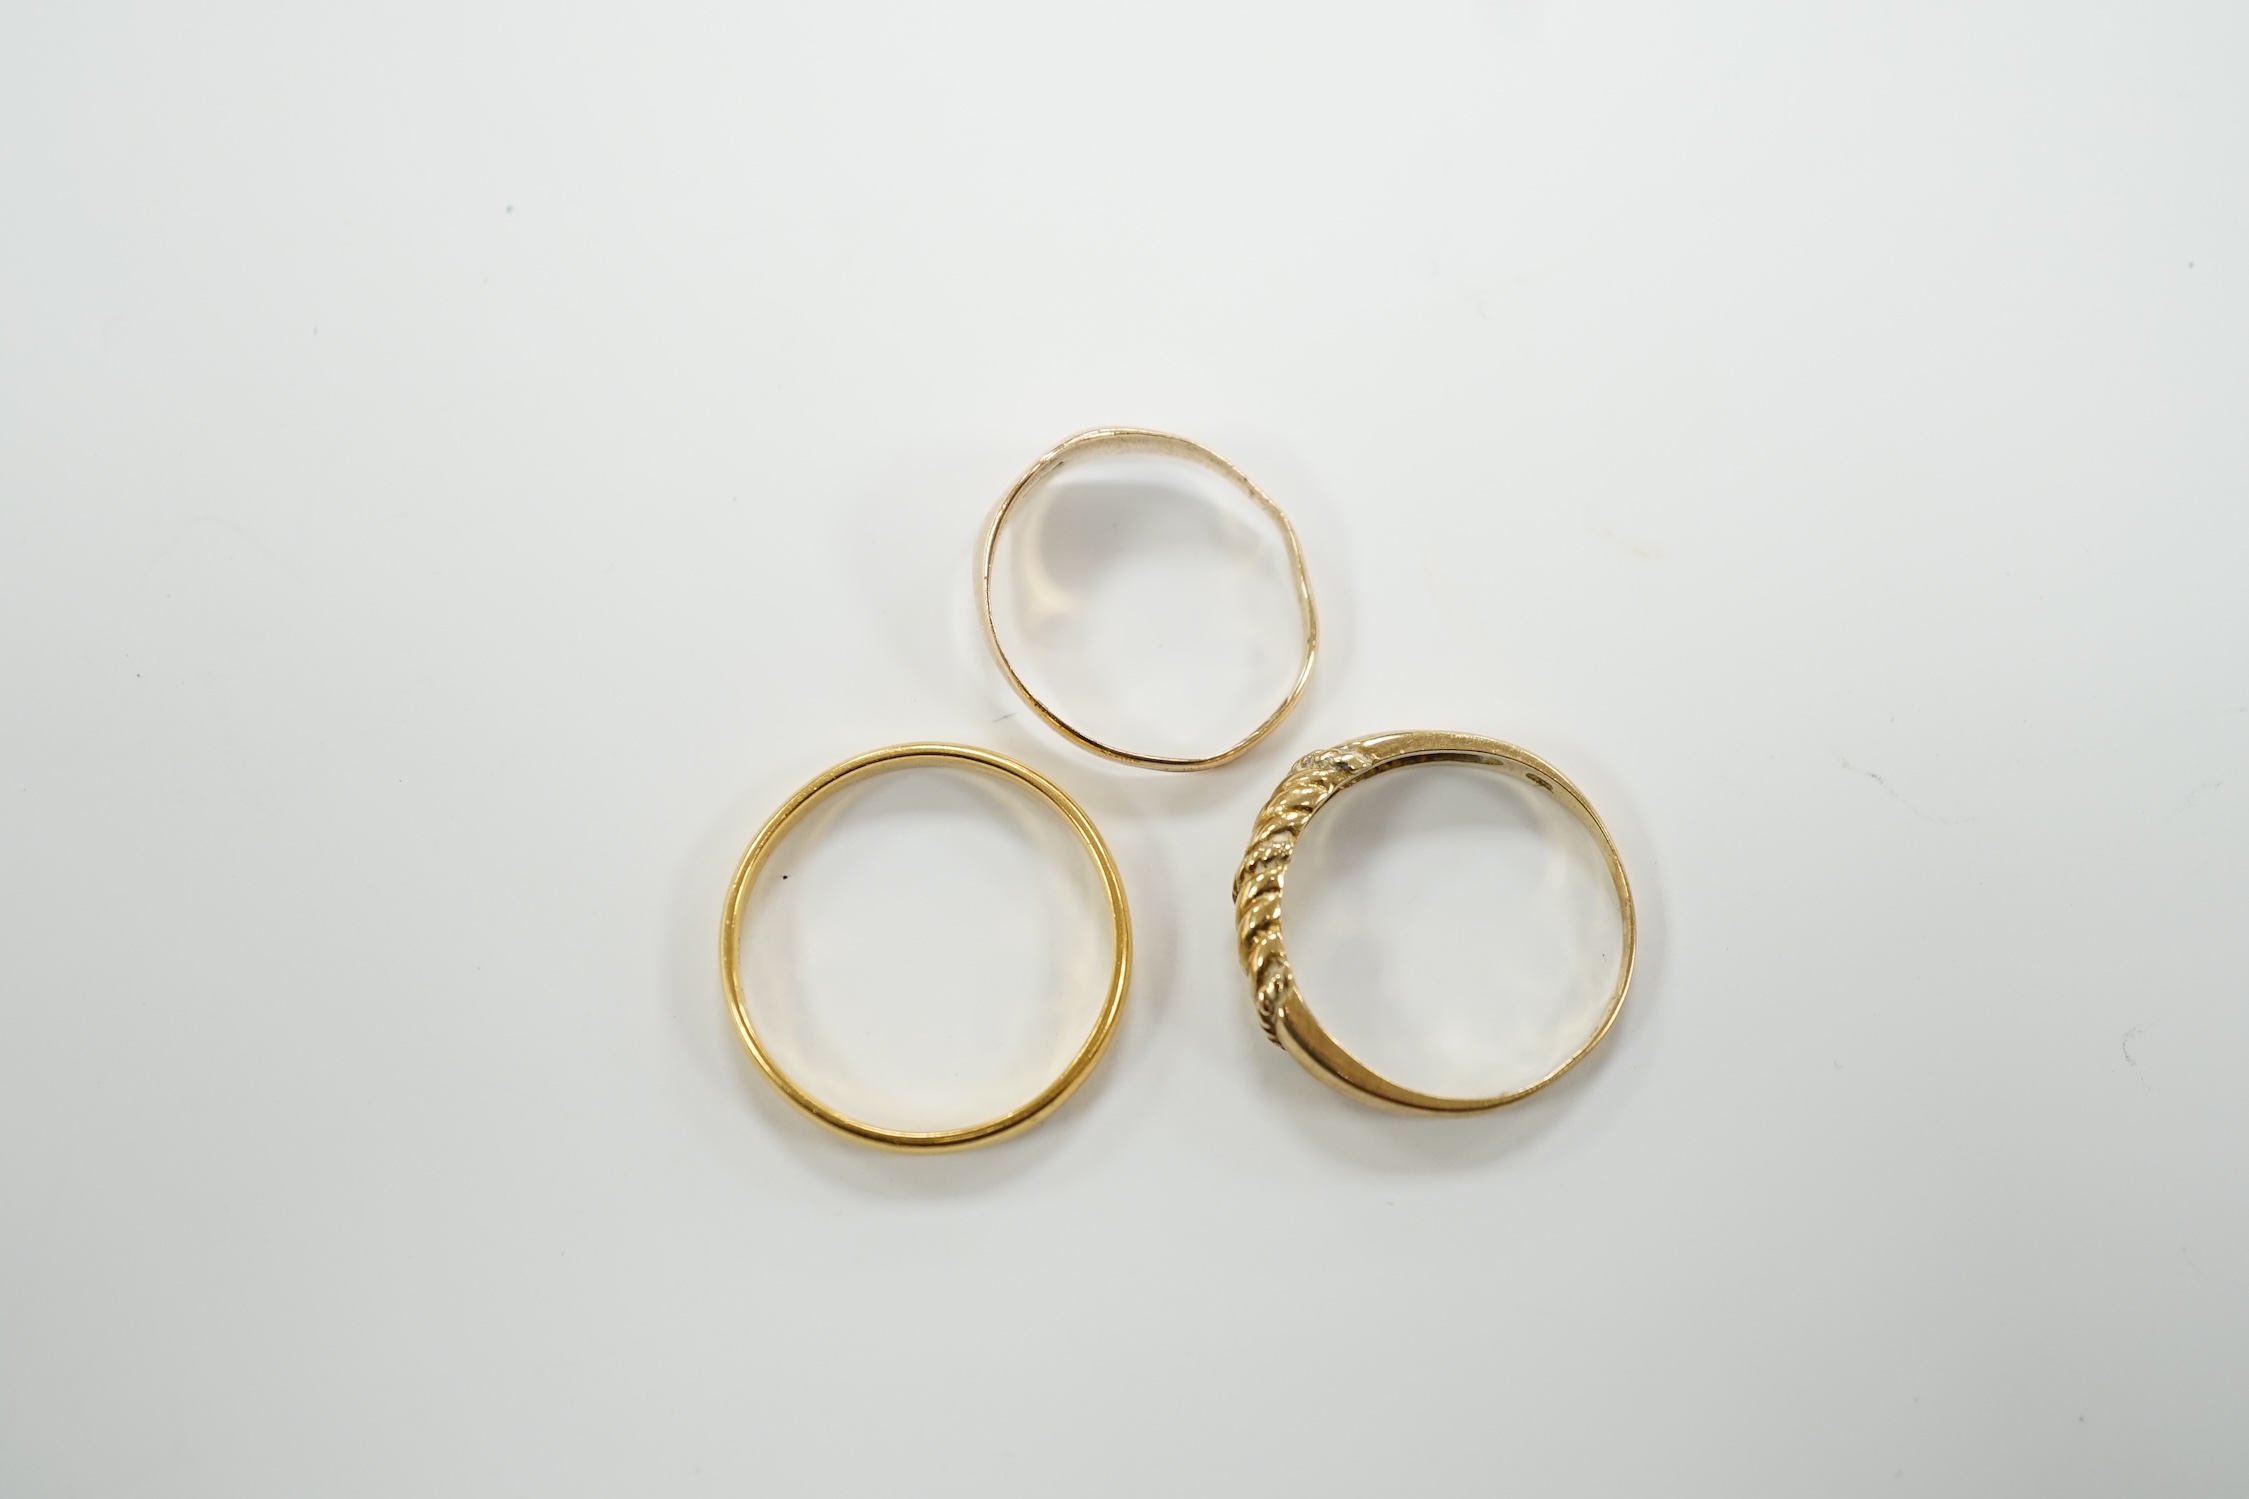 A 22ct gold wedding band, 3.4 grams, a 9ct gold signet ring, 16 grams and a yellow metal ring.